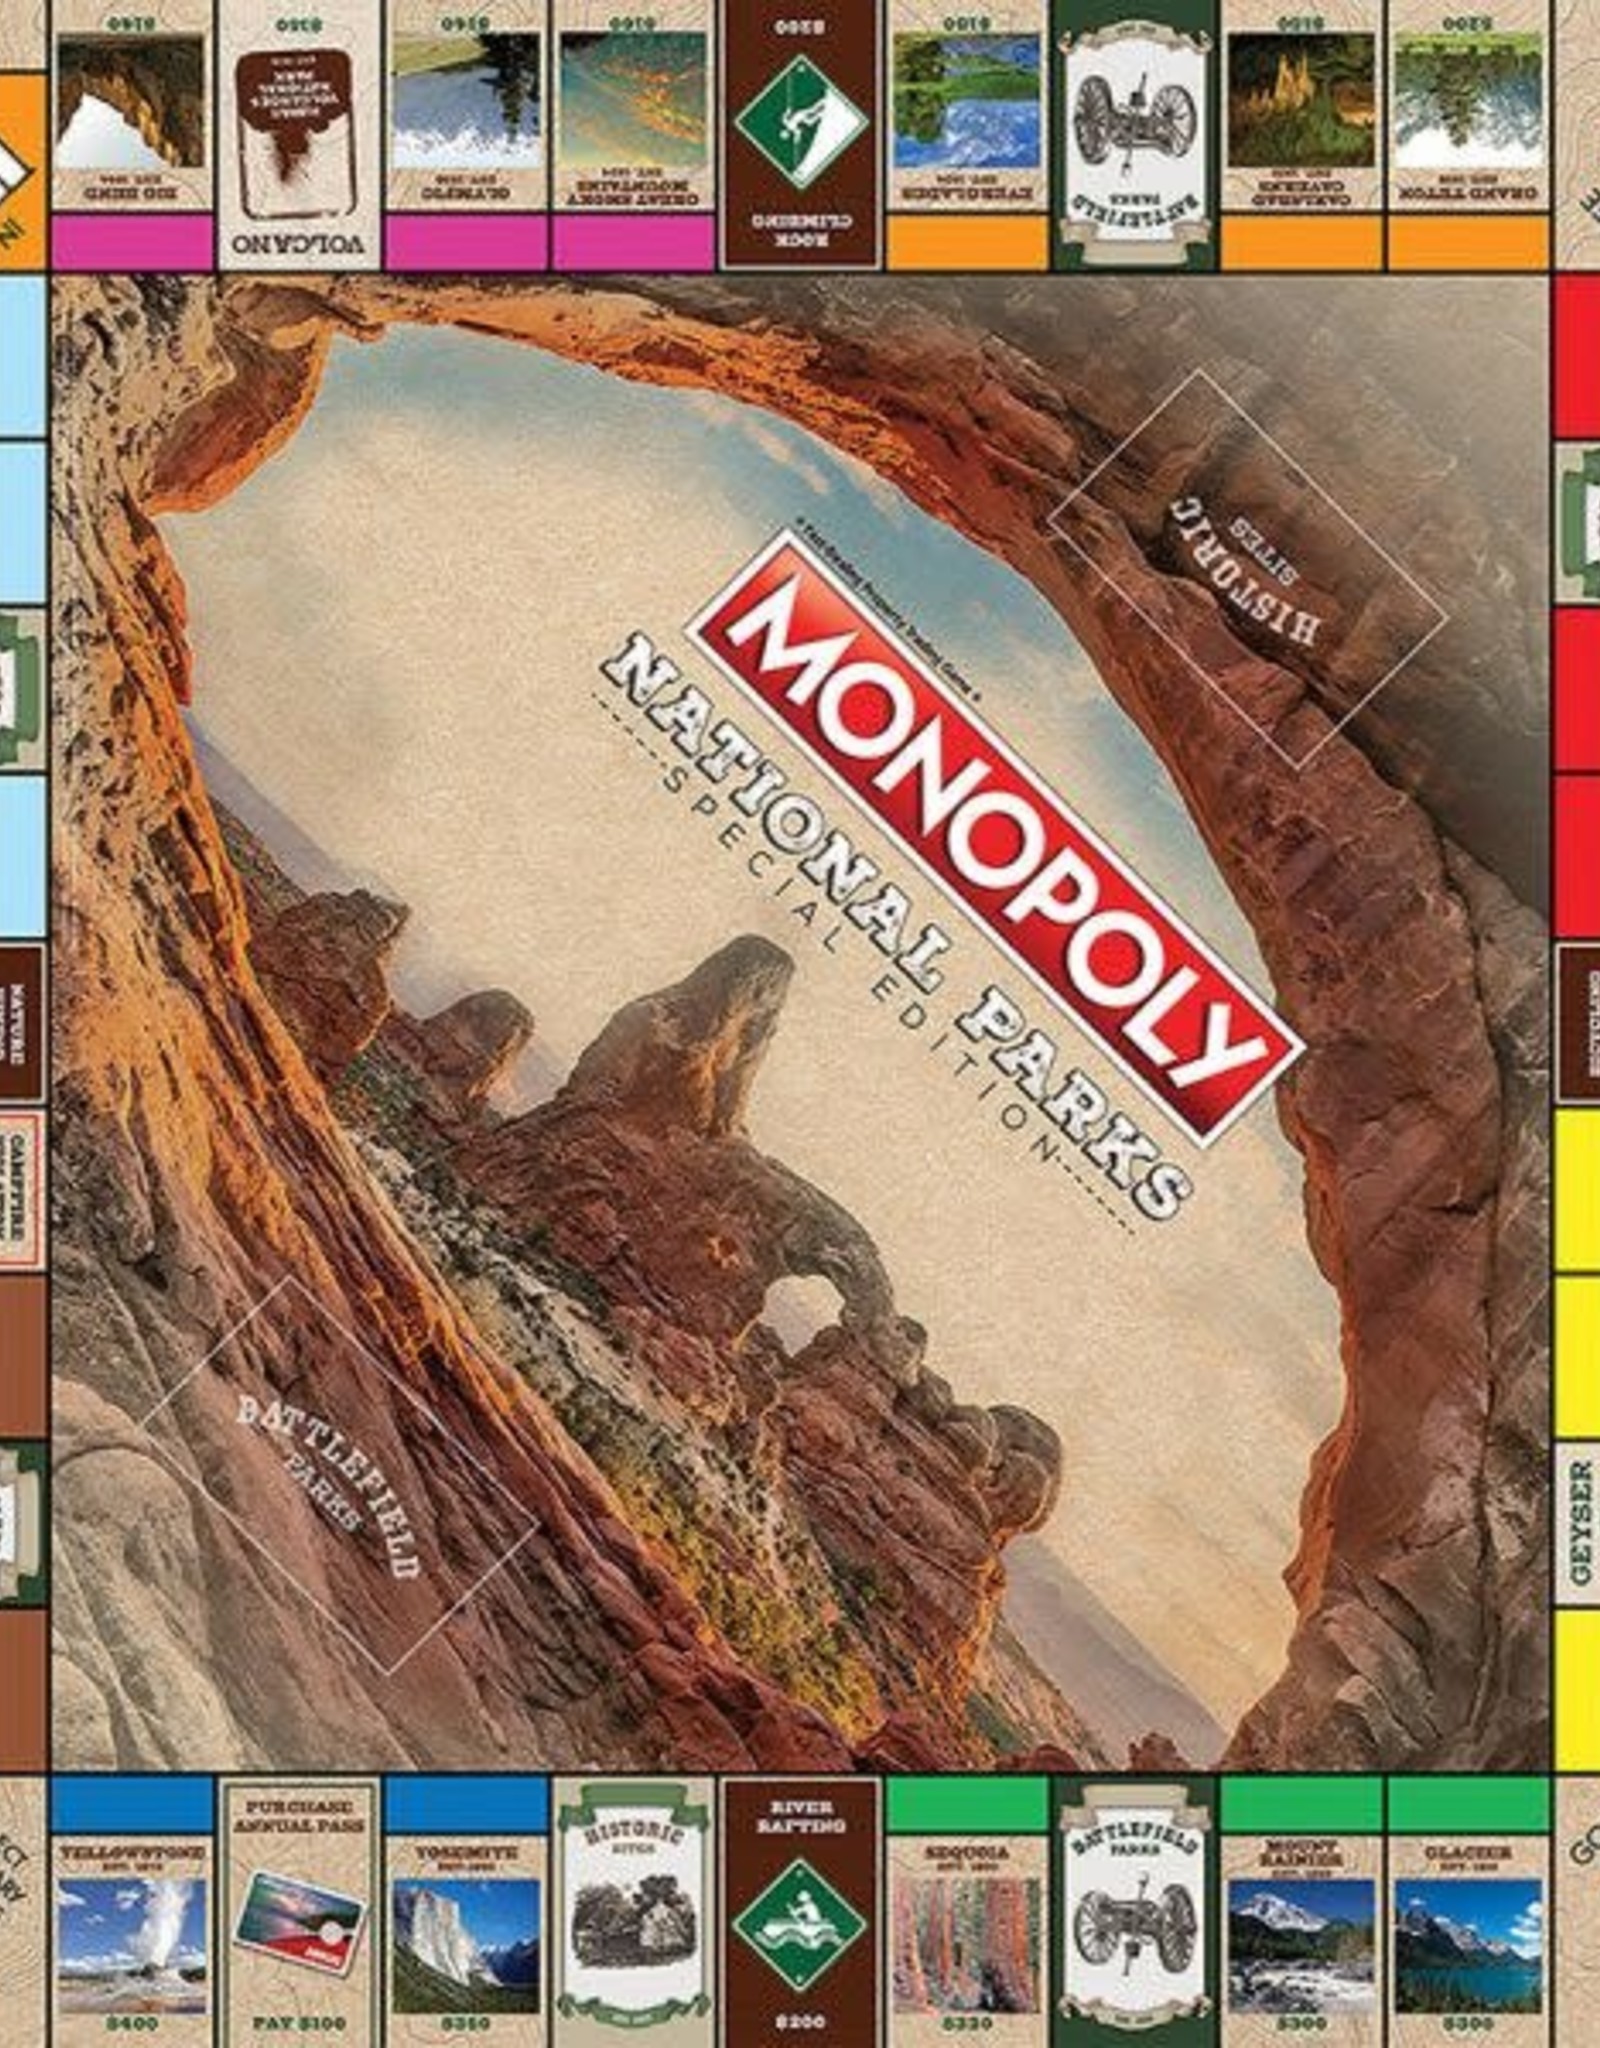 USAopoly Monopoly National Parks